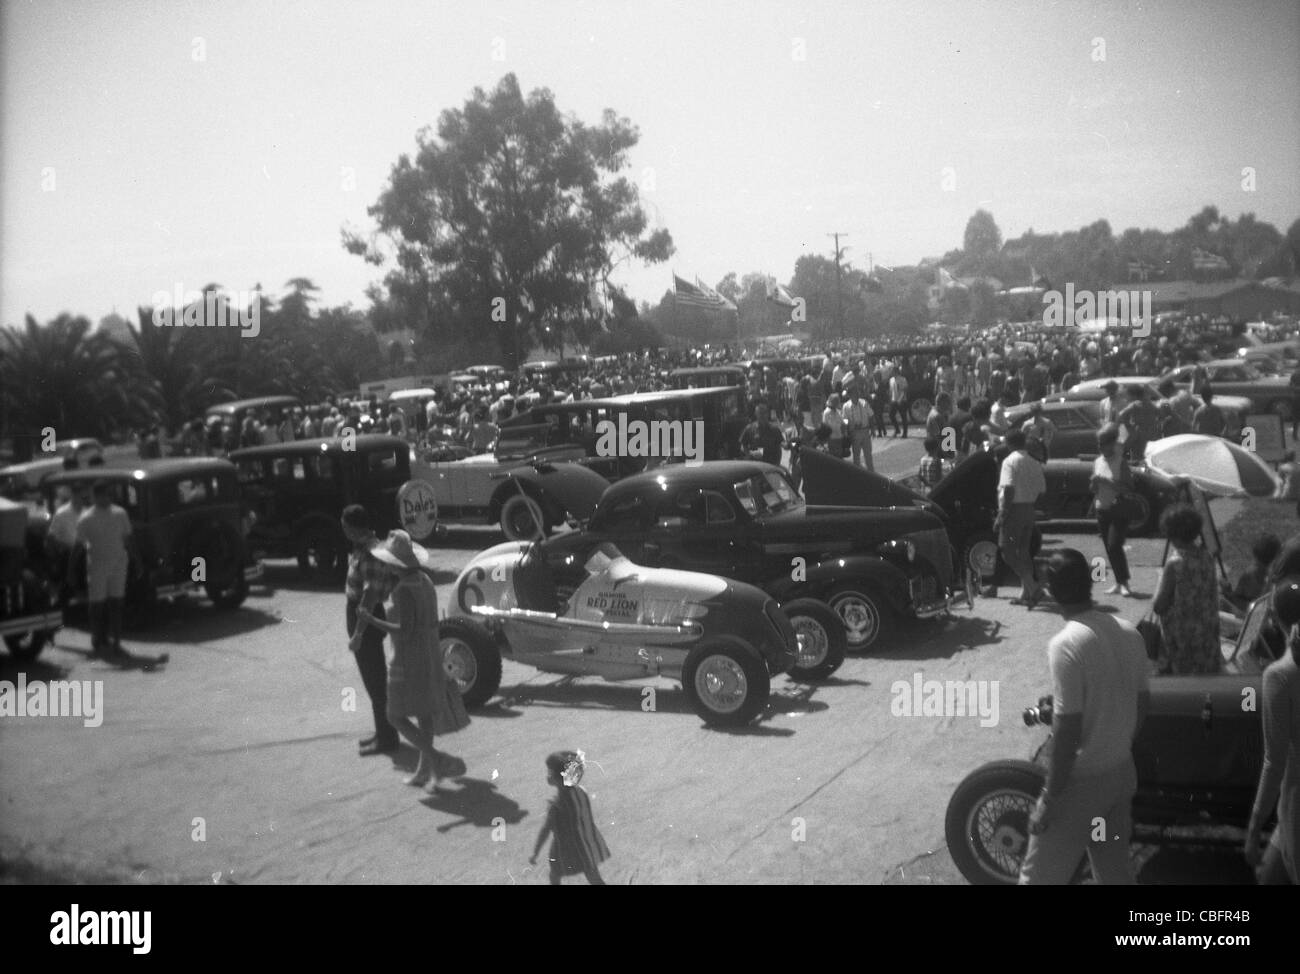 1960s car show southern california race cars sports cars parked Stock Photo